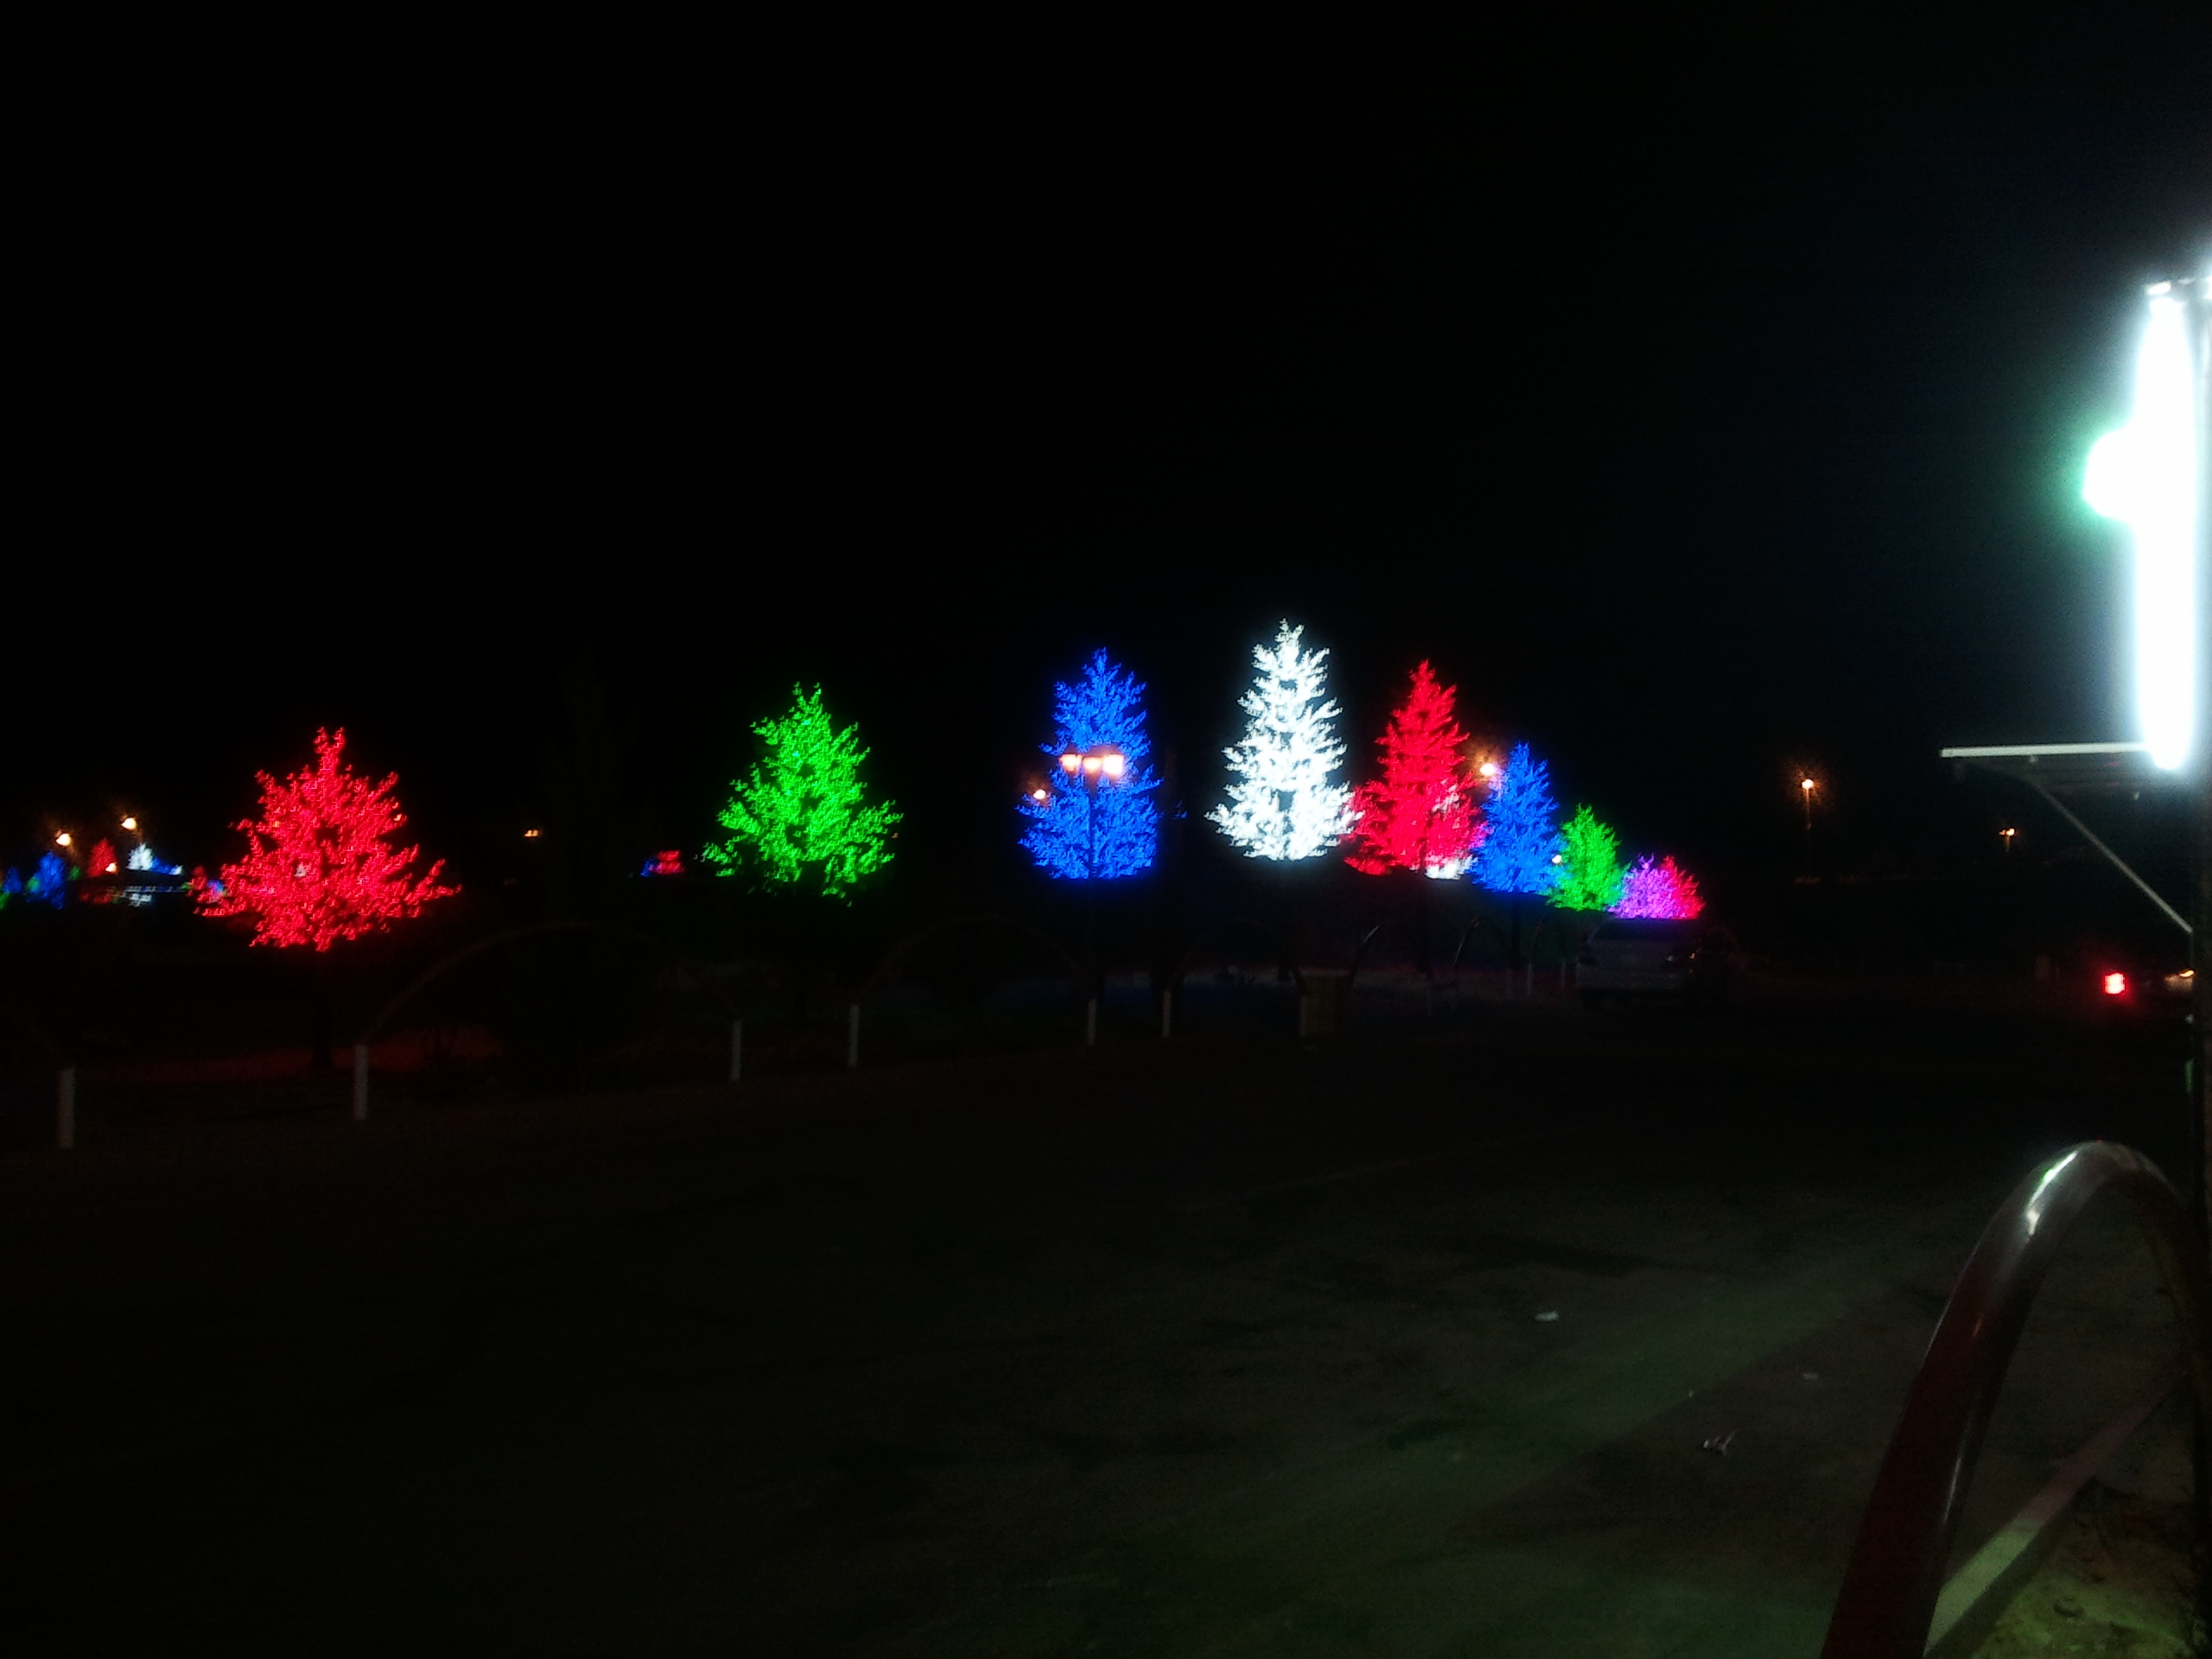 LED trees installed in Saudi Arabia Dubai and other countries